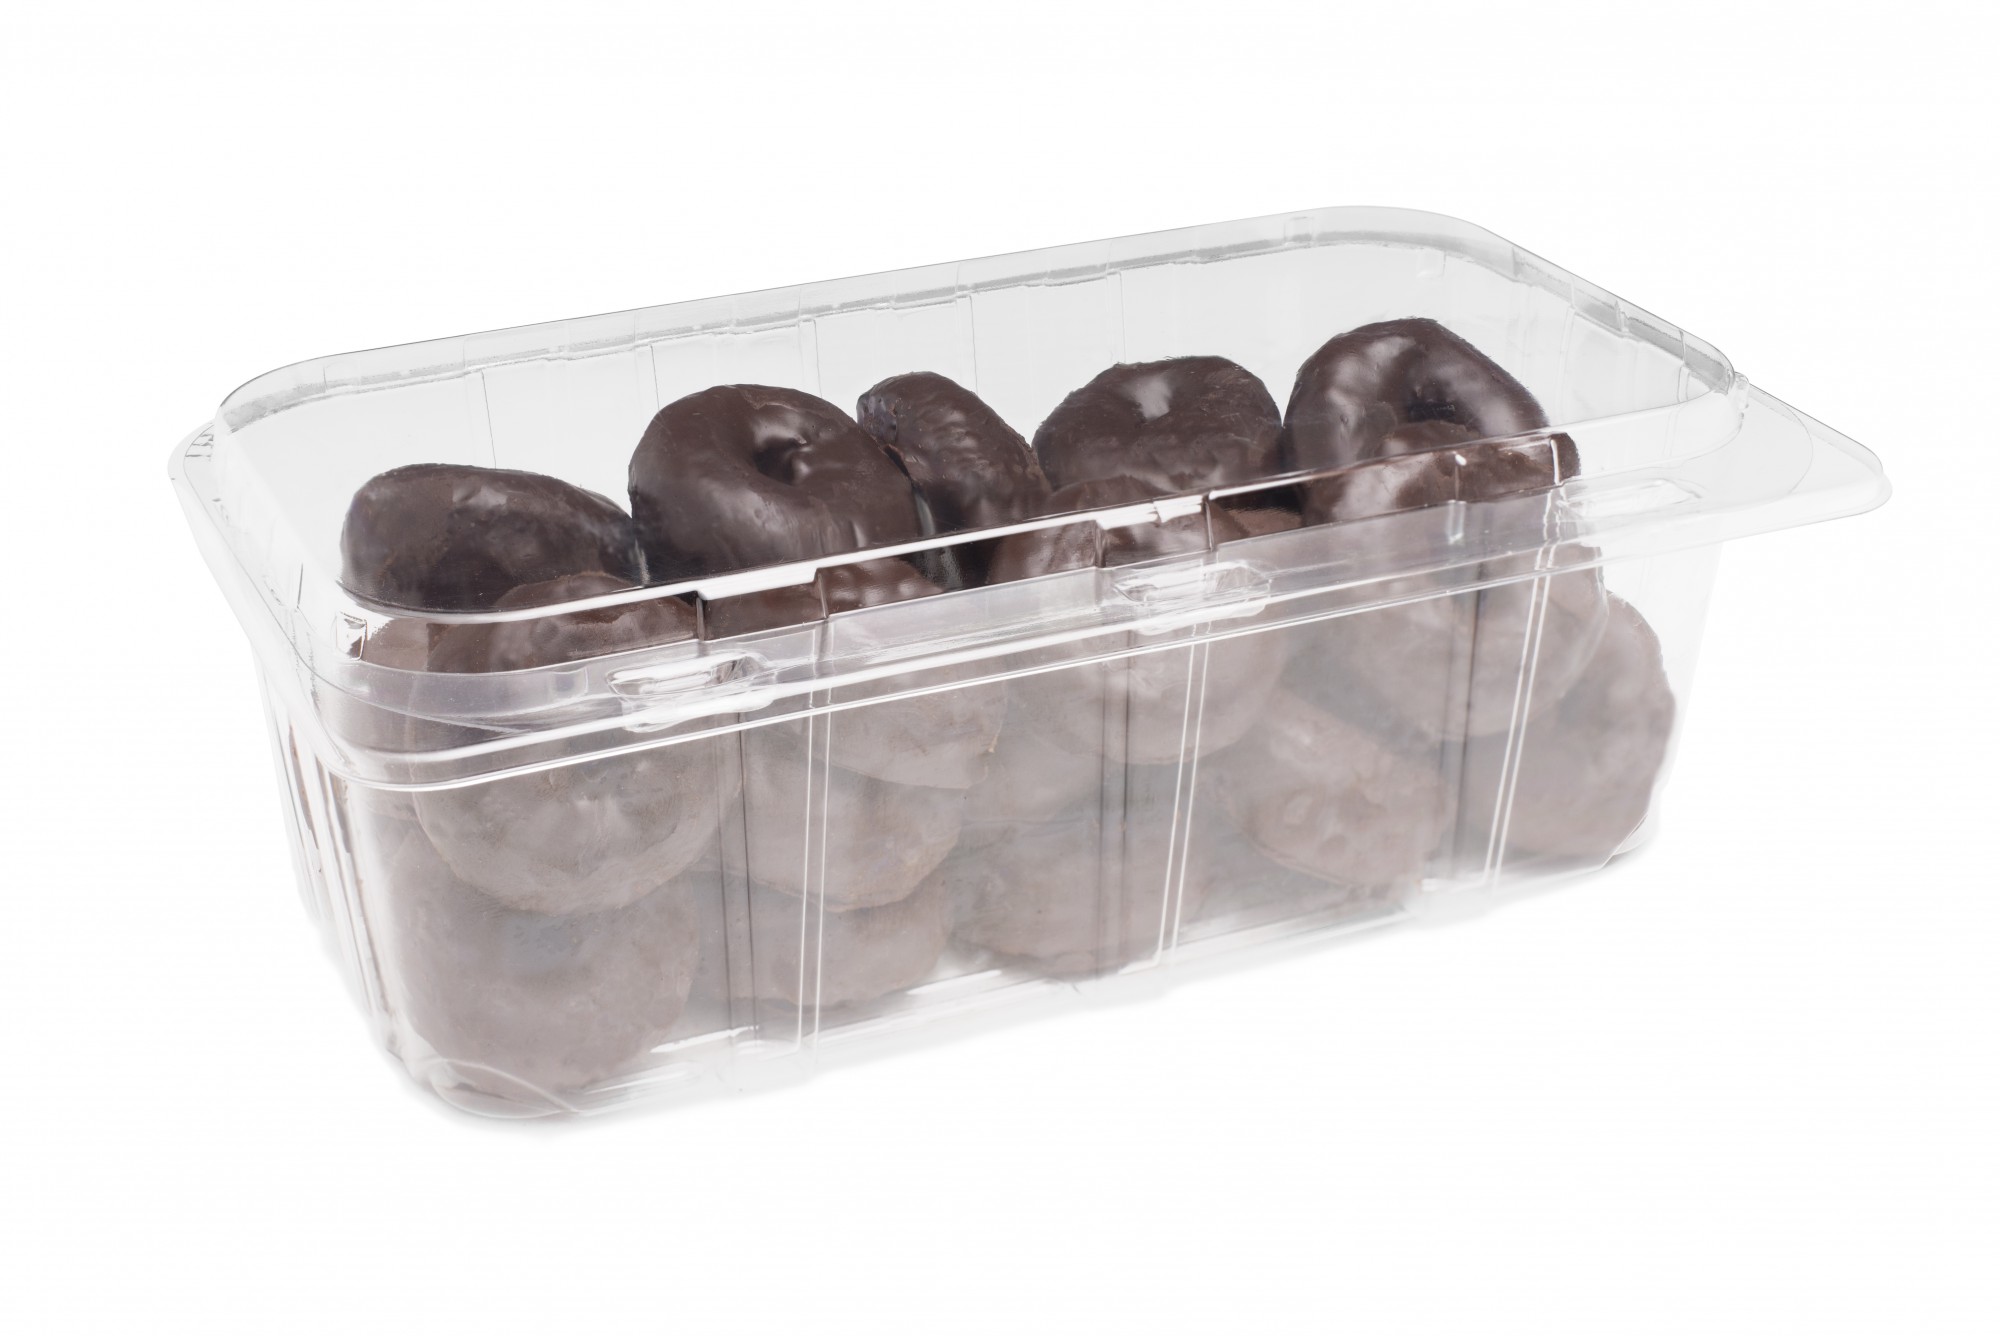 Fukuda Package Material China Cheesecake Storage Container Manufacturer  Dpbs-H125c Transparent 500ml/17oz 120*130*35mm Fruit 10 Oz Plastic  Containers with Lids - China Plastic Container, Plastic Food Container